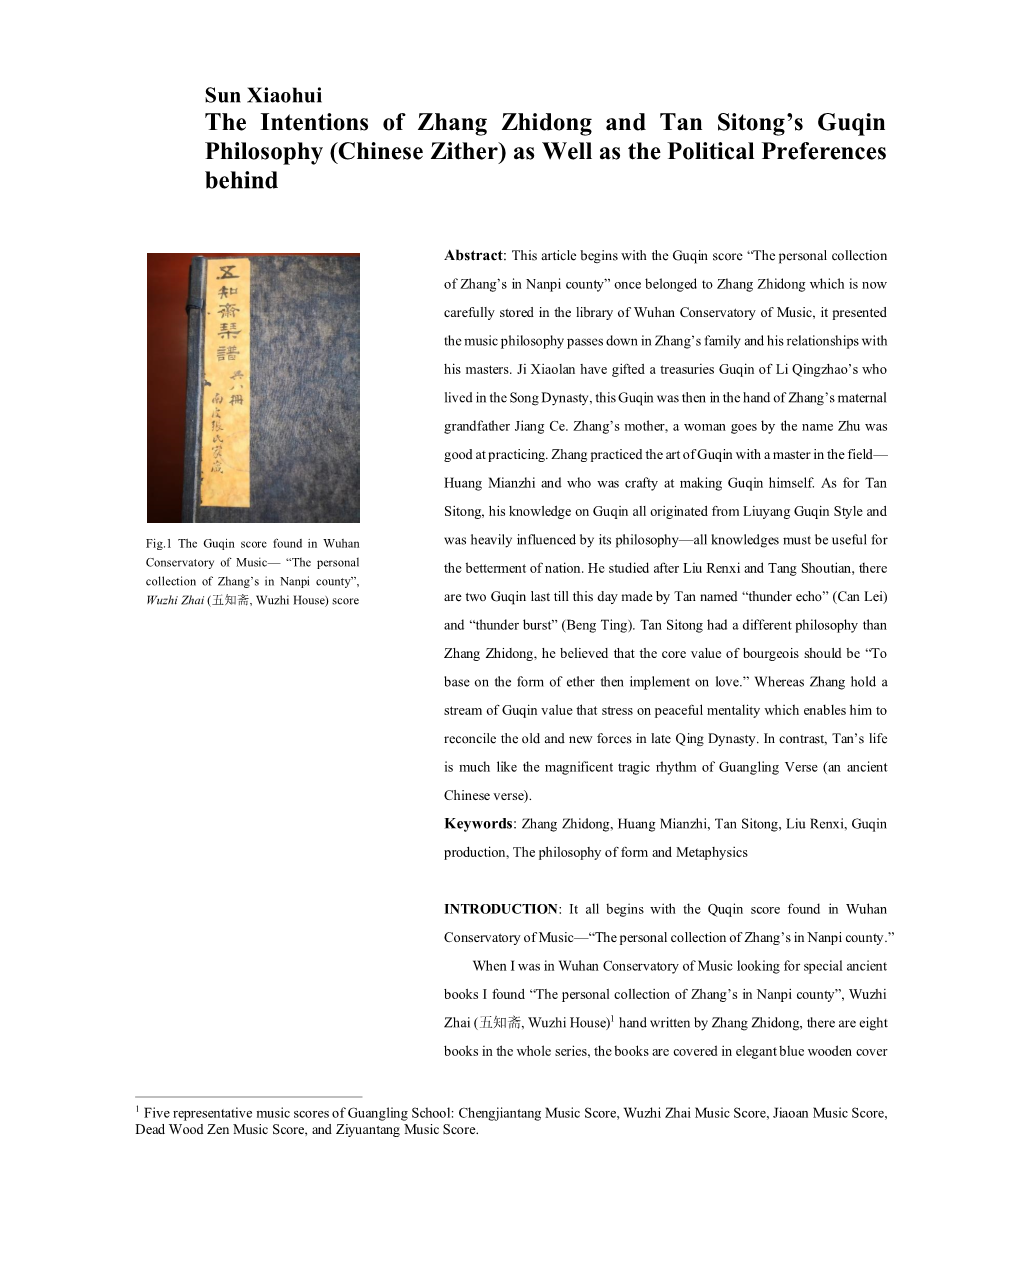 The Intentions of Zhang Zhidong and Tan Sitong's Guqin Philosophy